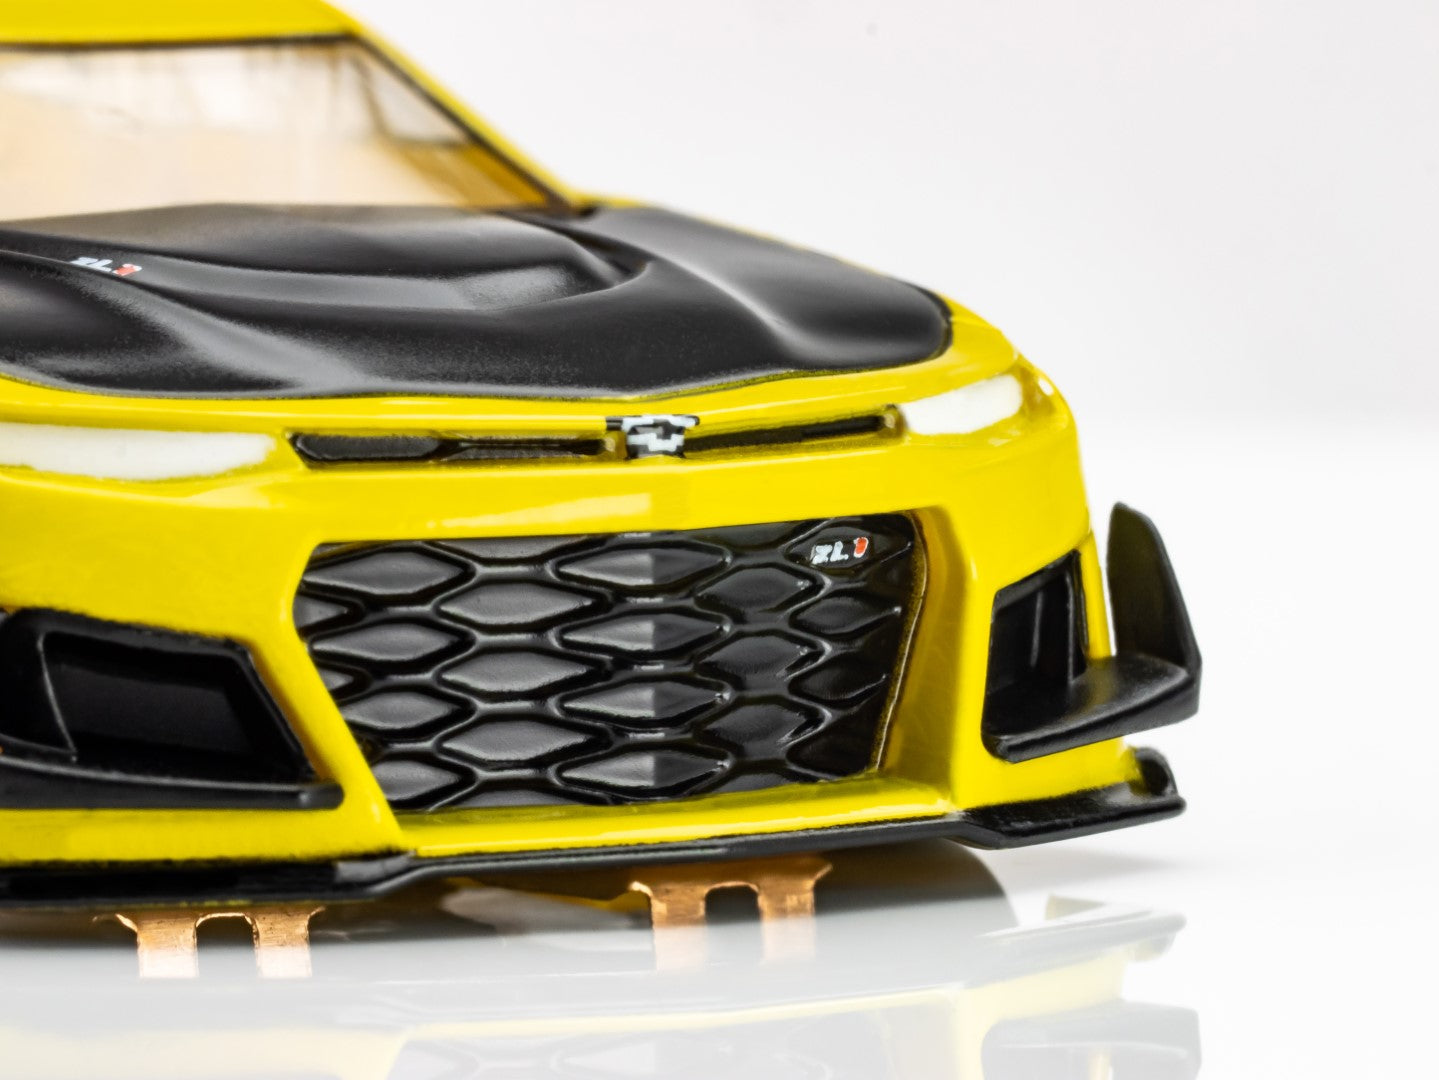 AFX 2021 Chevy Camaro 1LE Shock Yellow HO Scale Slot Car 22075 AFX22075 - PowerHobby